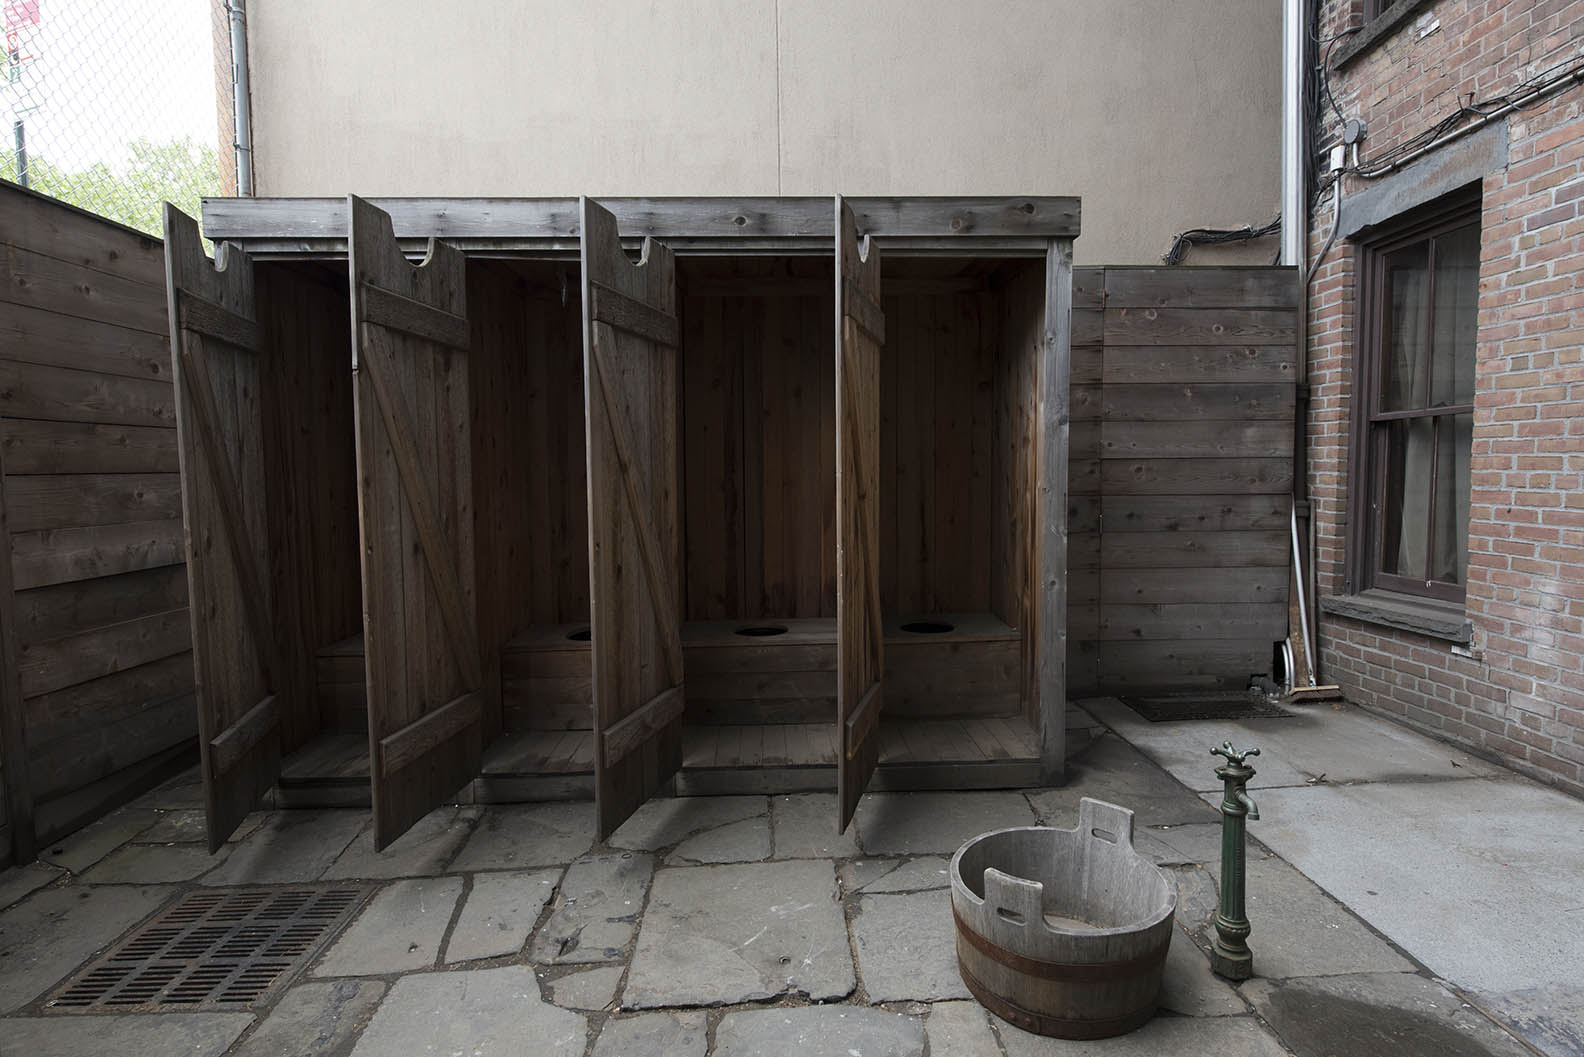 A wooden outhouse with four stalls stands with all its doors open